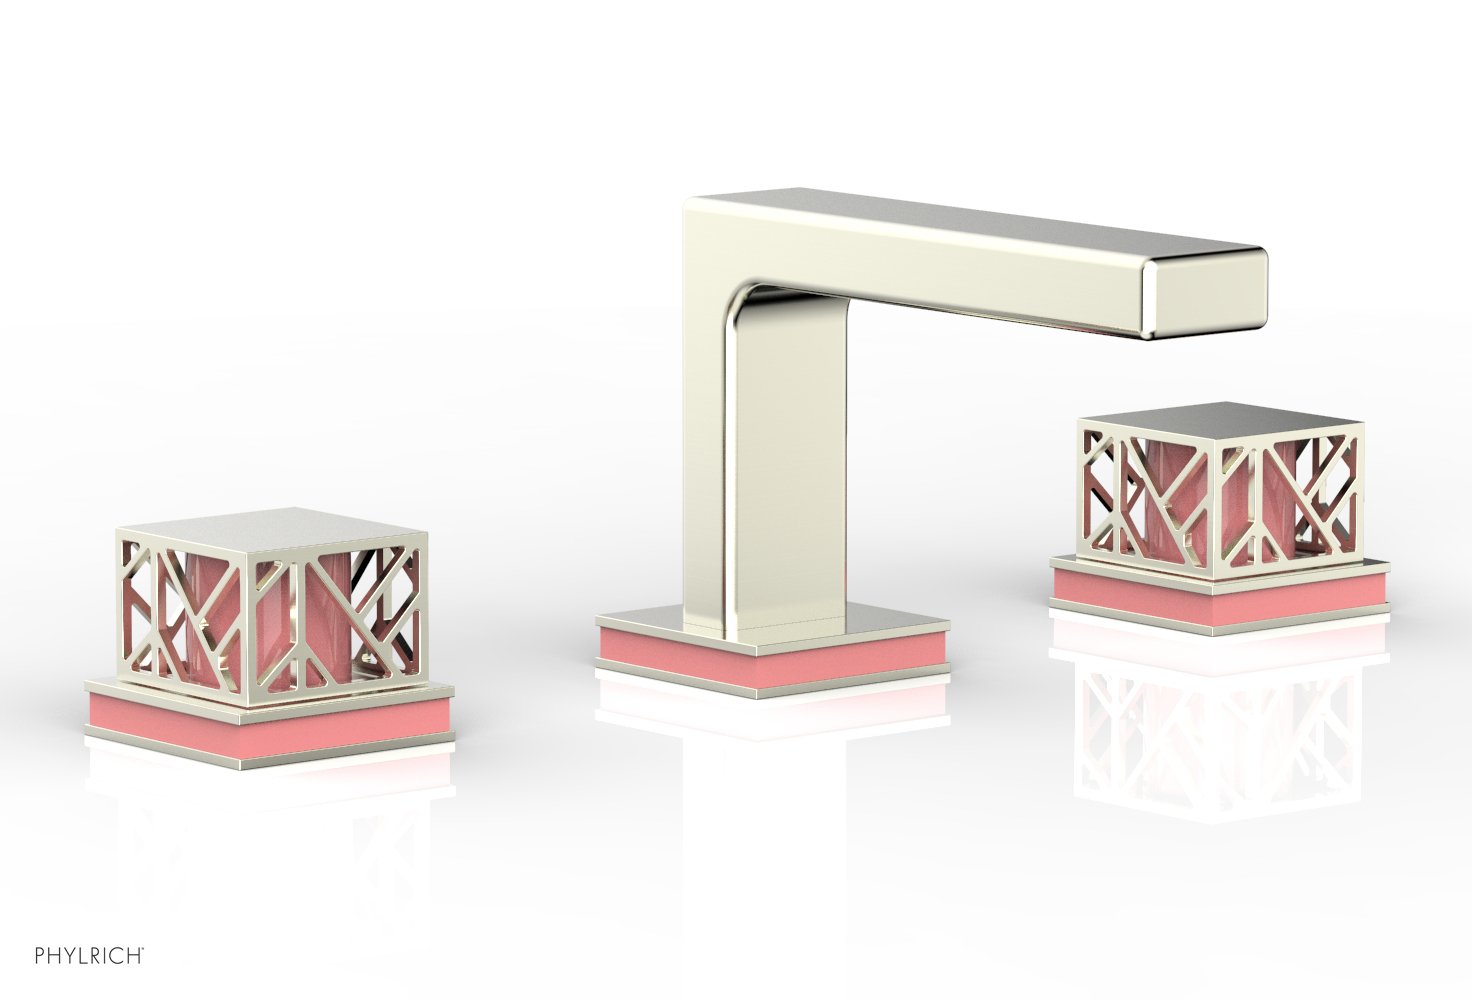 Phylrich JOLIE Widespread Faucet - Square Handles with "Pink" Accents